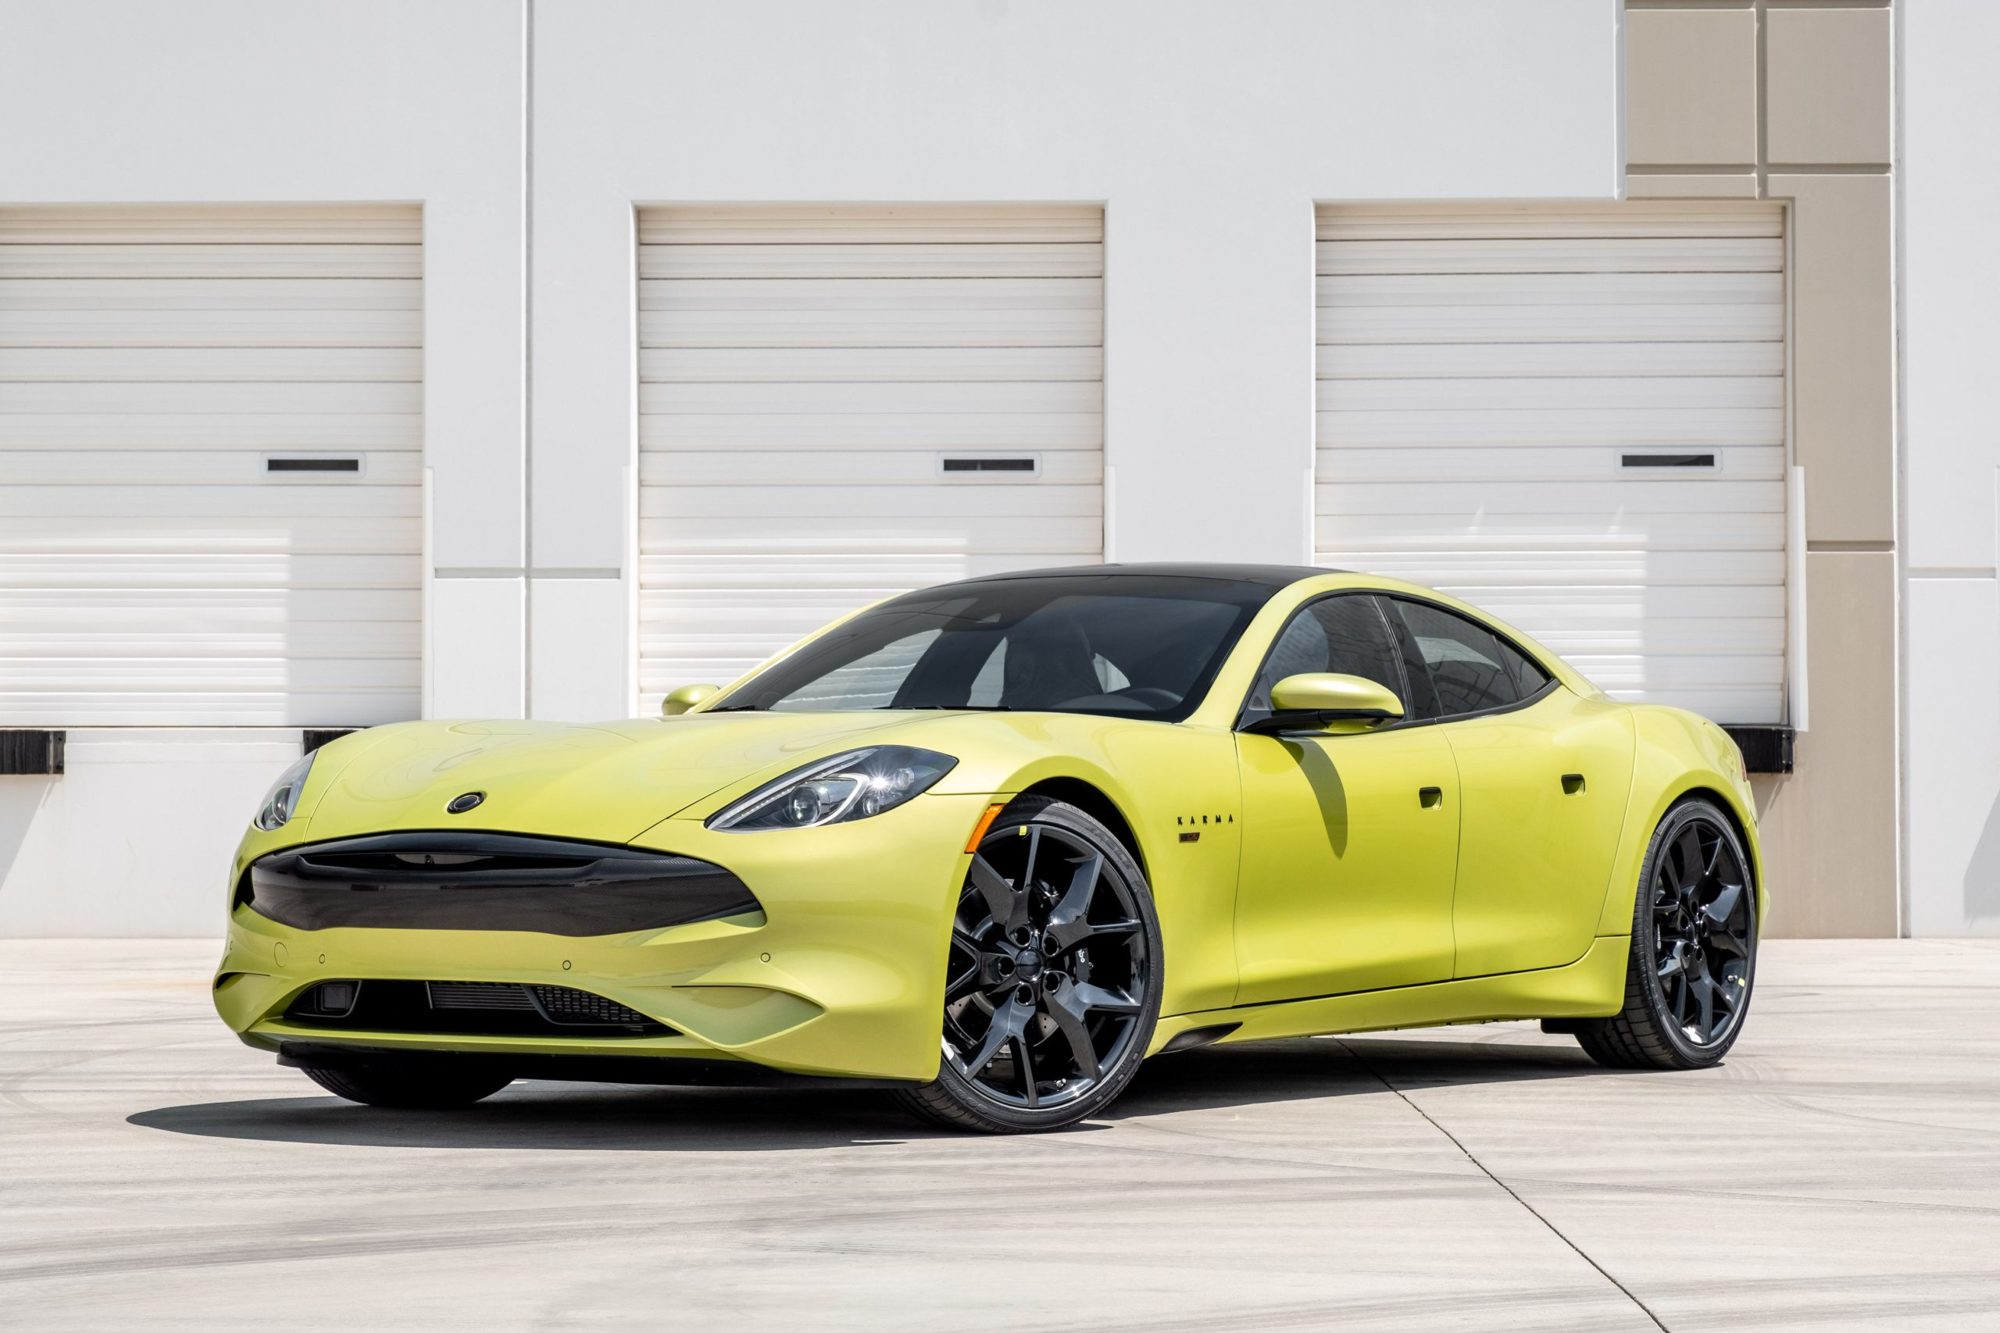 The Karma Automotive GS-6 in Saguaro Green. The cars start at about $80,000.